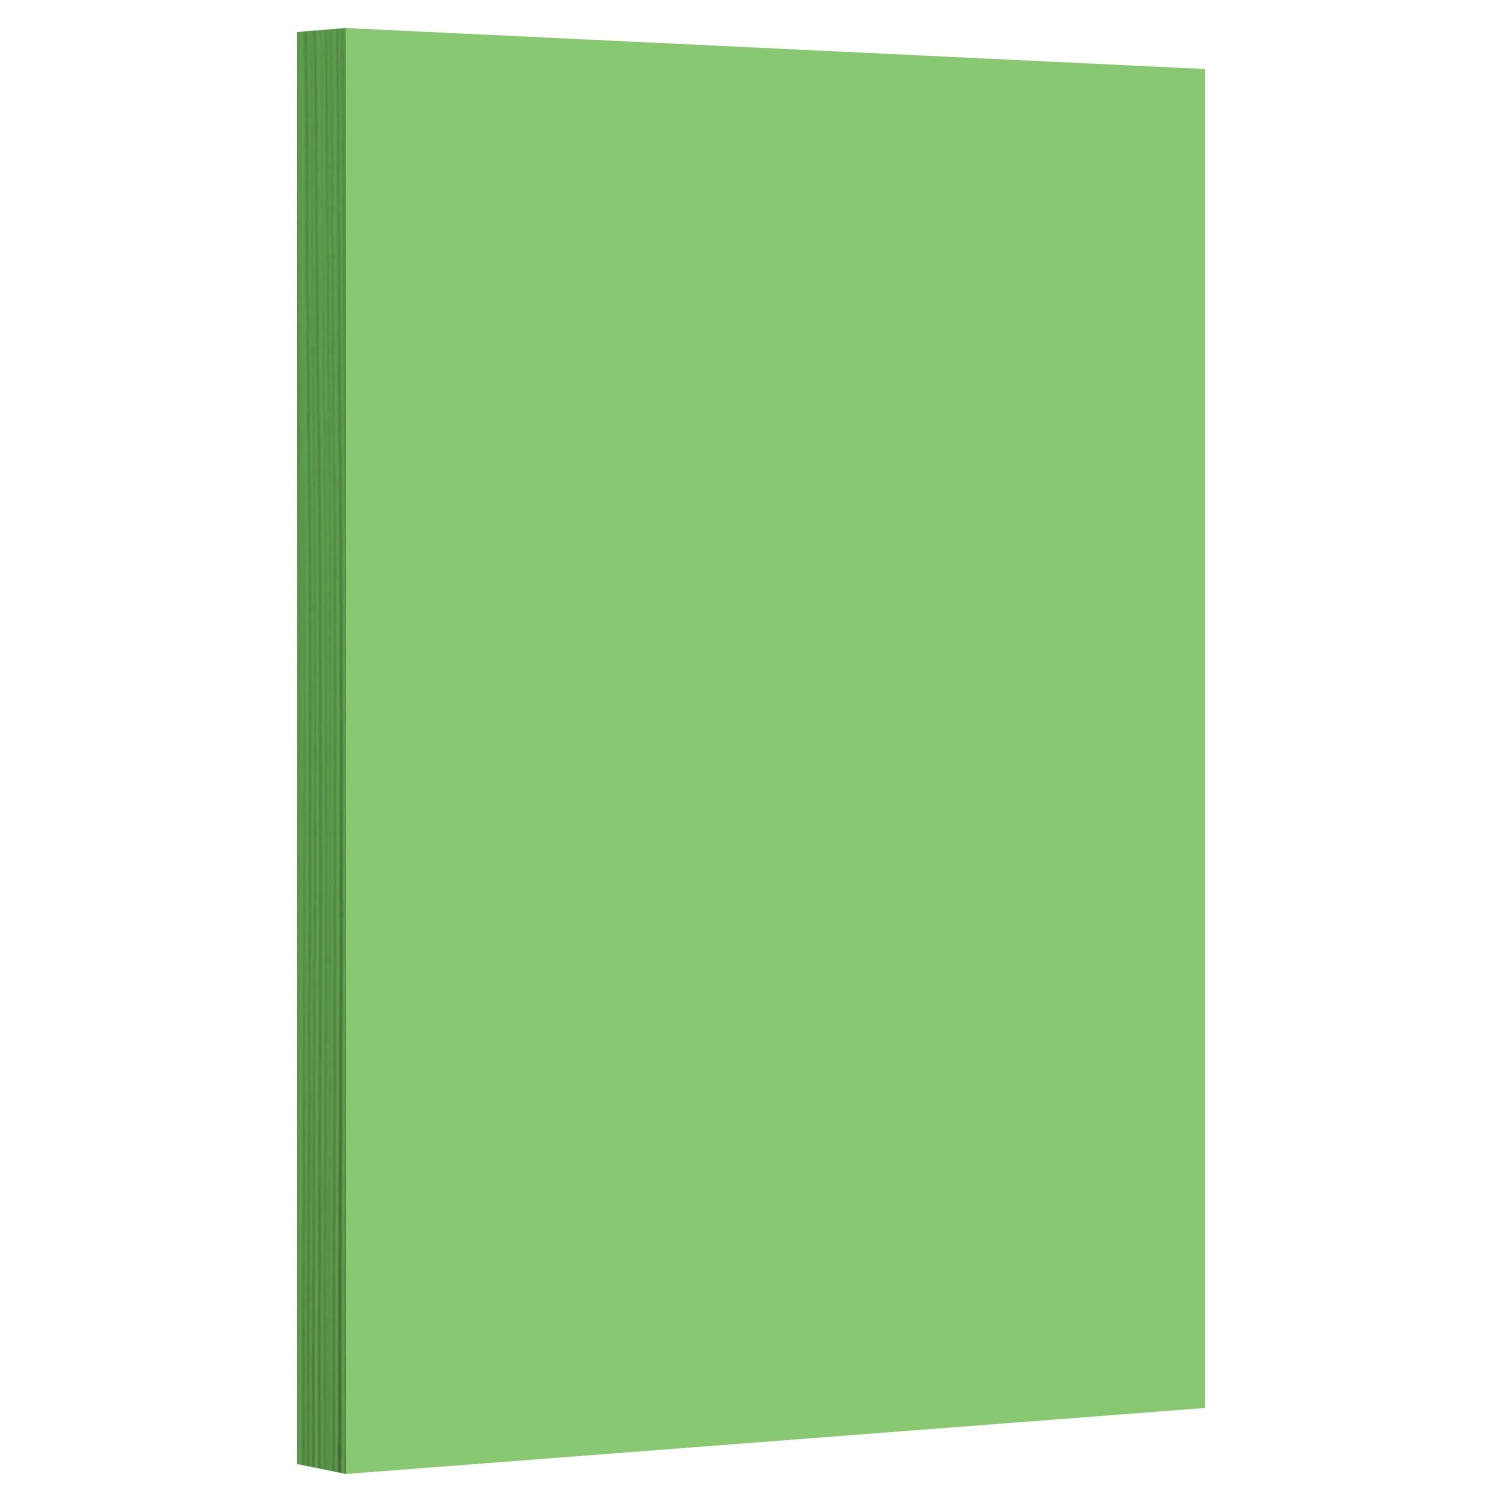 11x 17 Green 50 Sheets Bright Color Card Stock Paper 